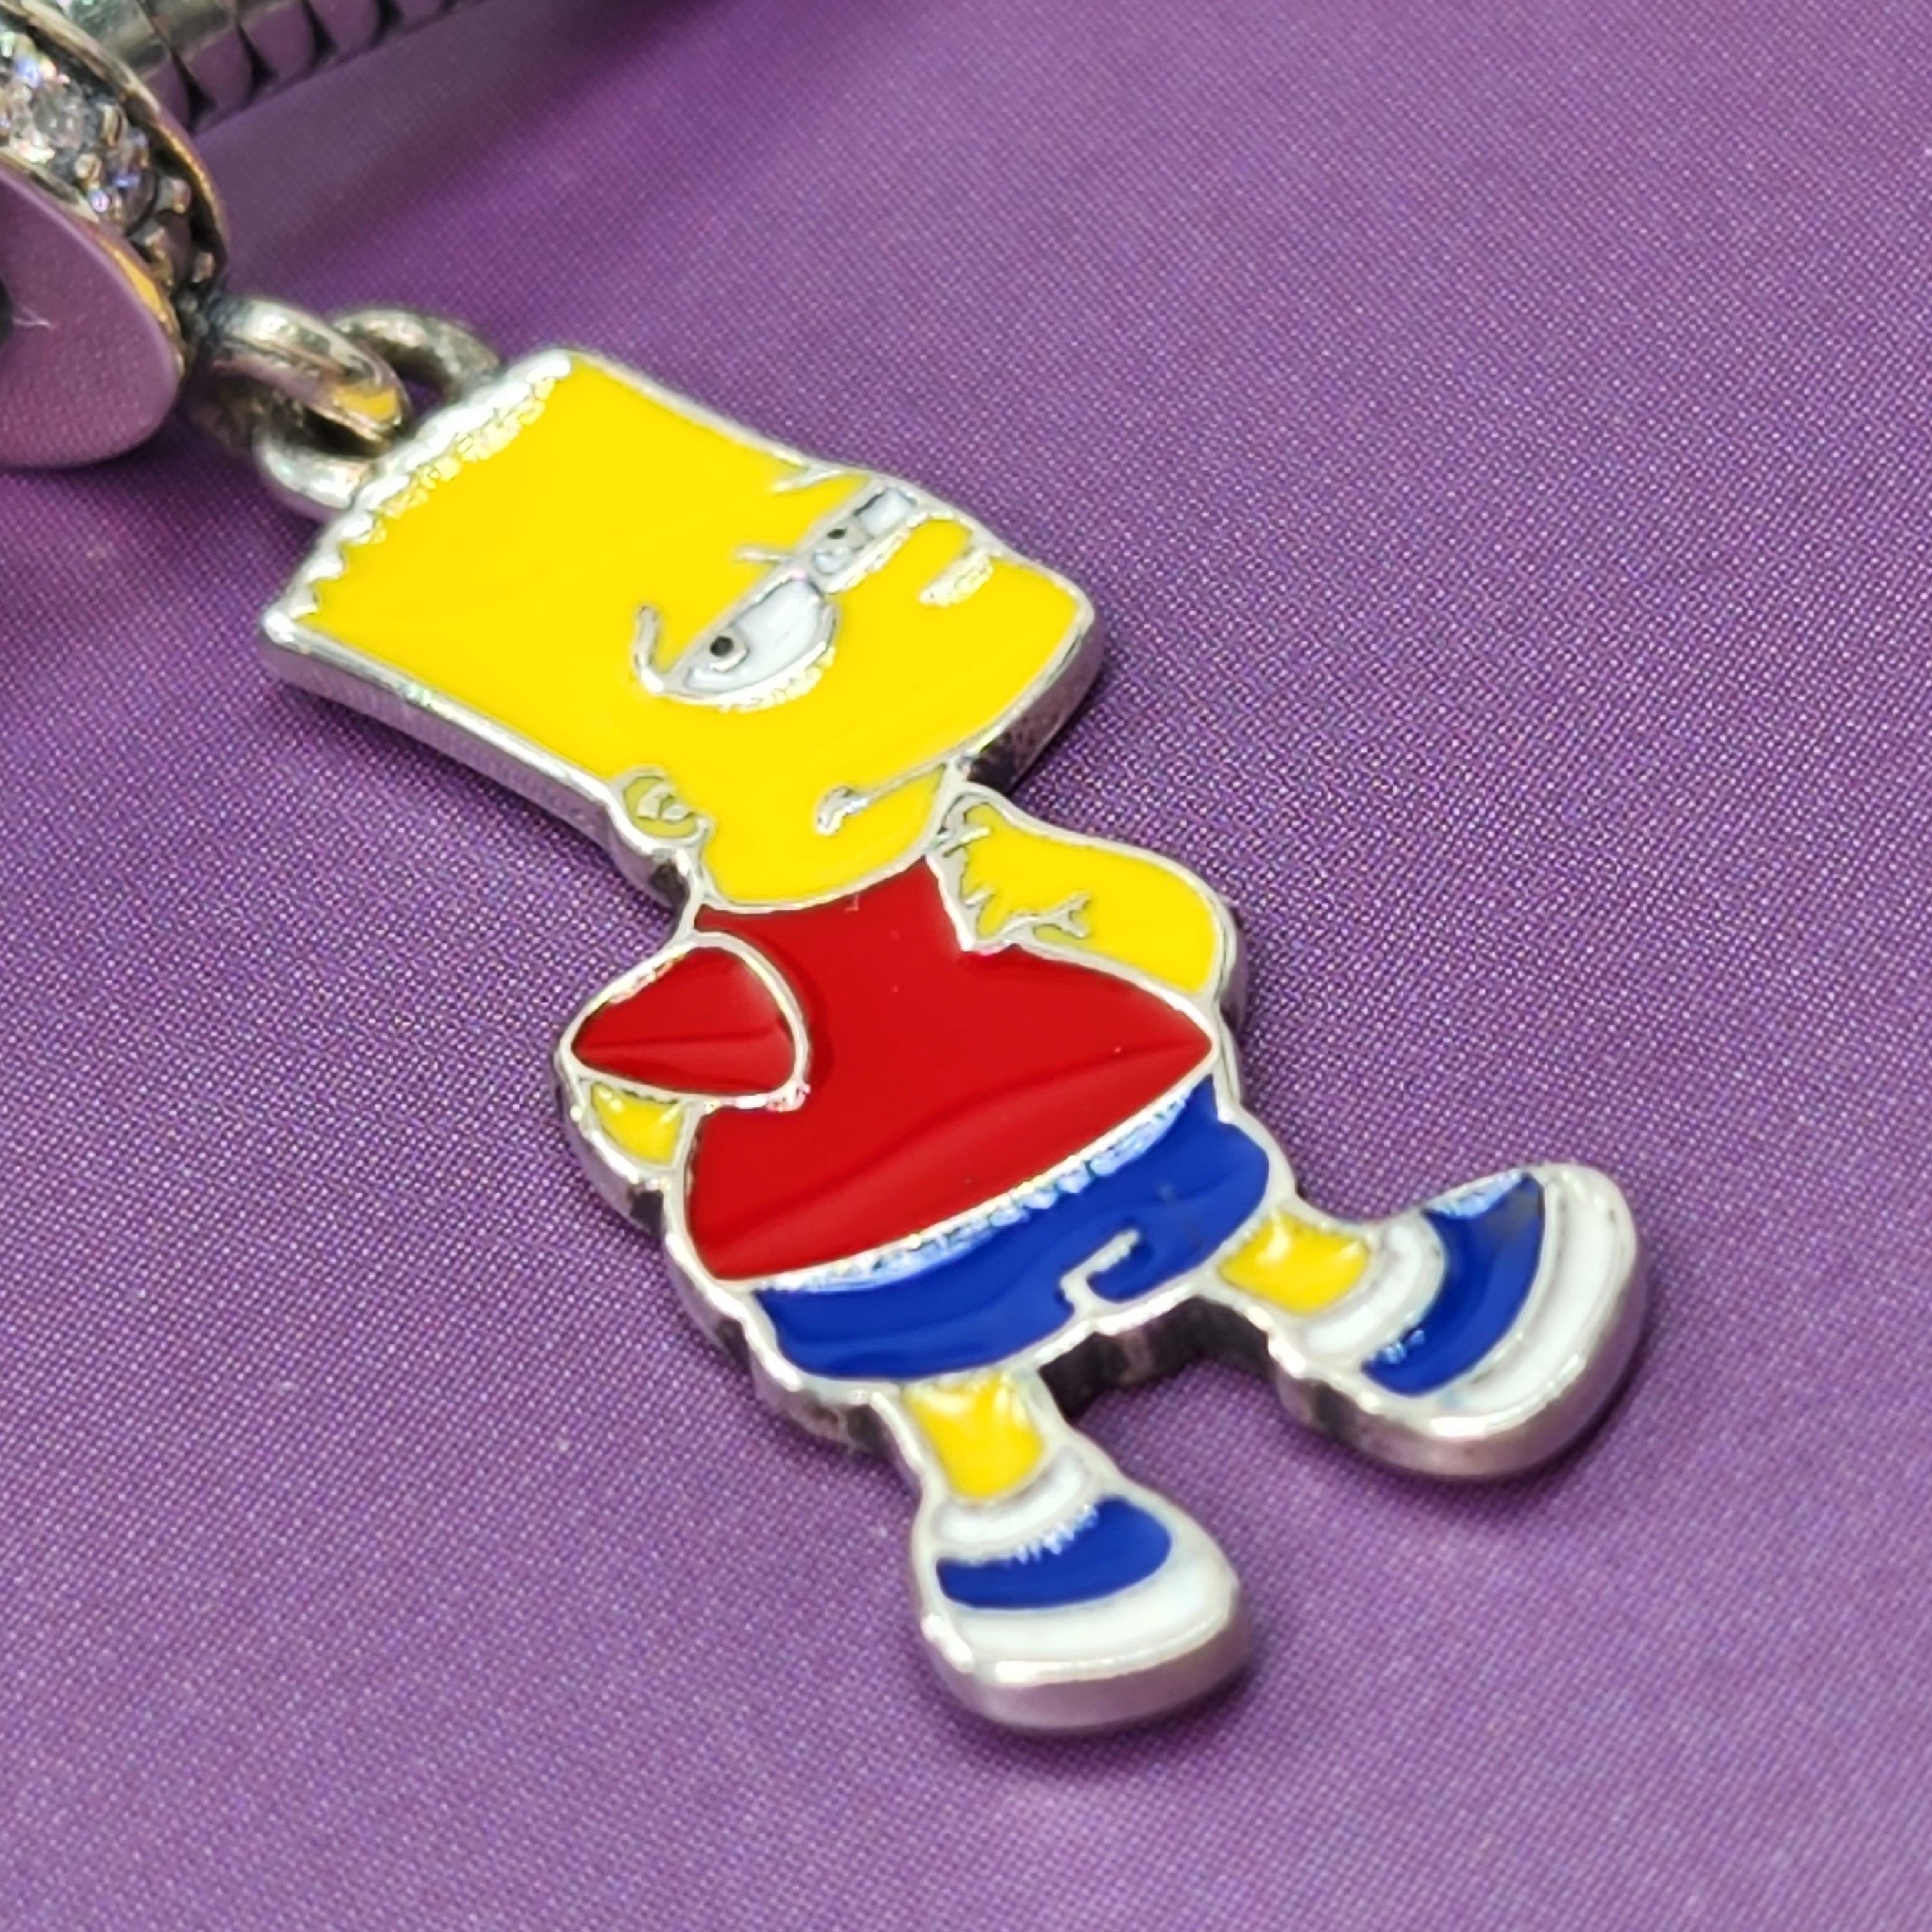 Cartoon Bart Simpson Enamel Brooch Fun Cosplay Anime Merch Accessory For  Kids And Friends From Baby_topwholesaler1, $1.04 | DHgate.Com